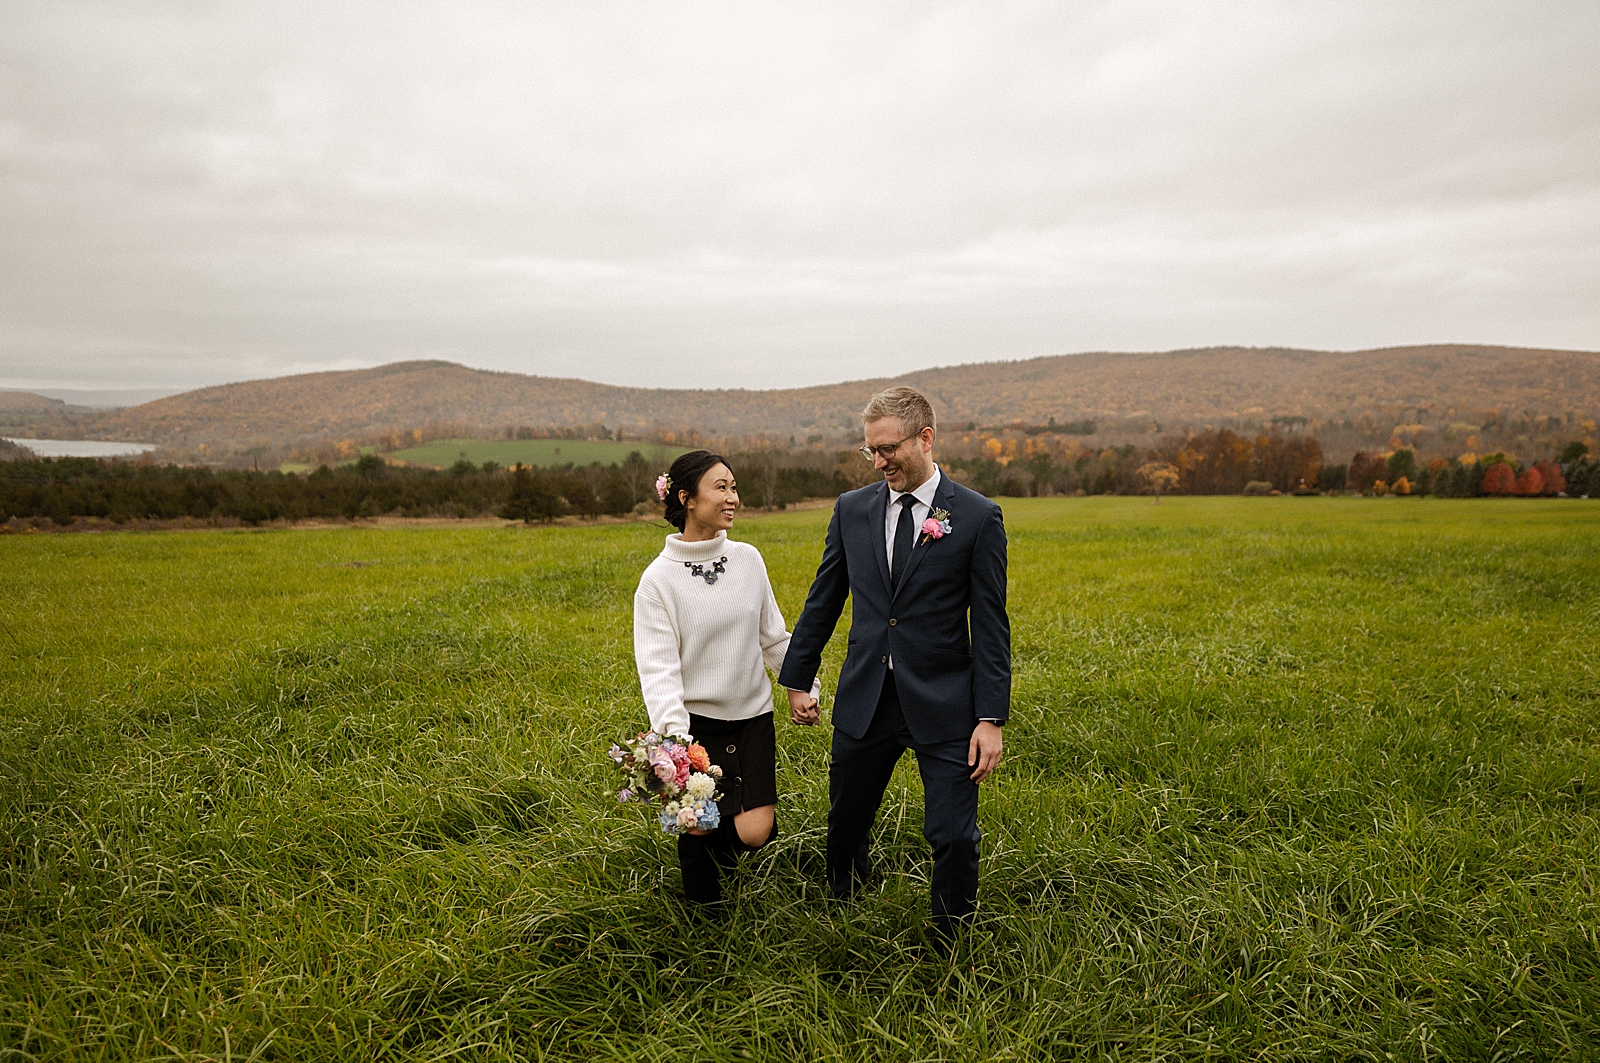 Bride and Groom holding hands walking in tall grass